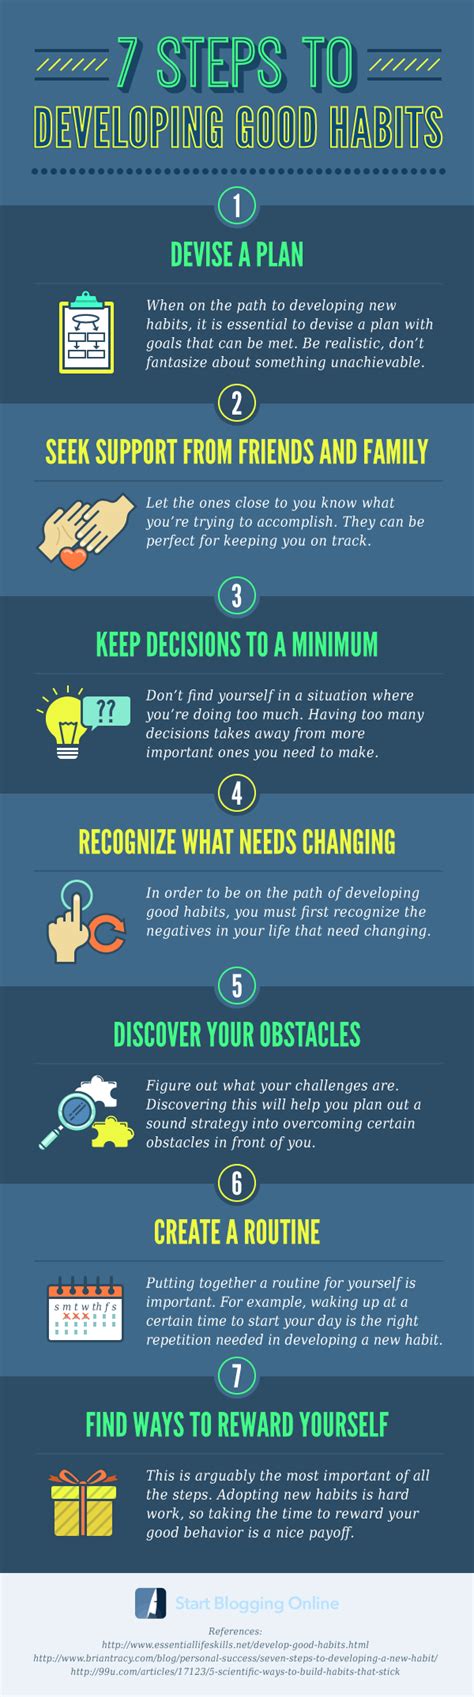 7 Steps To Developing Good Habits Must See Infographic